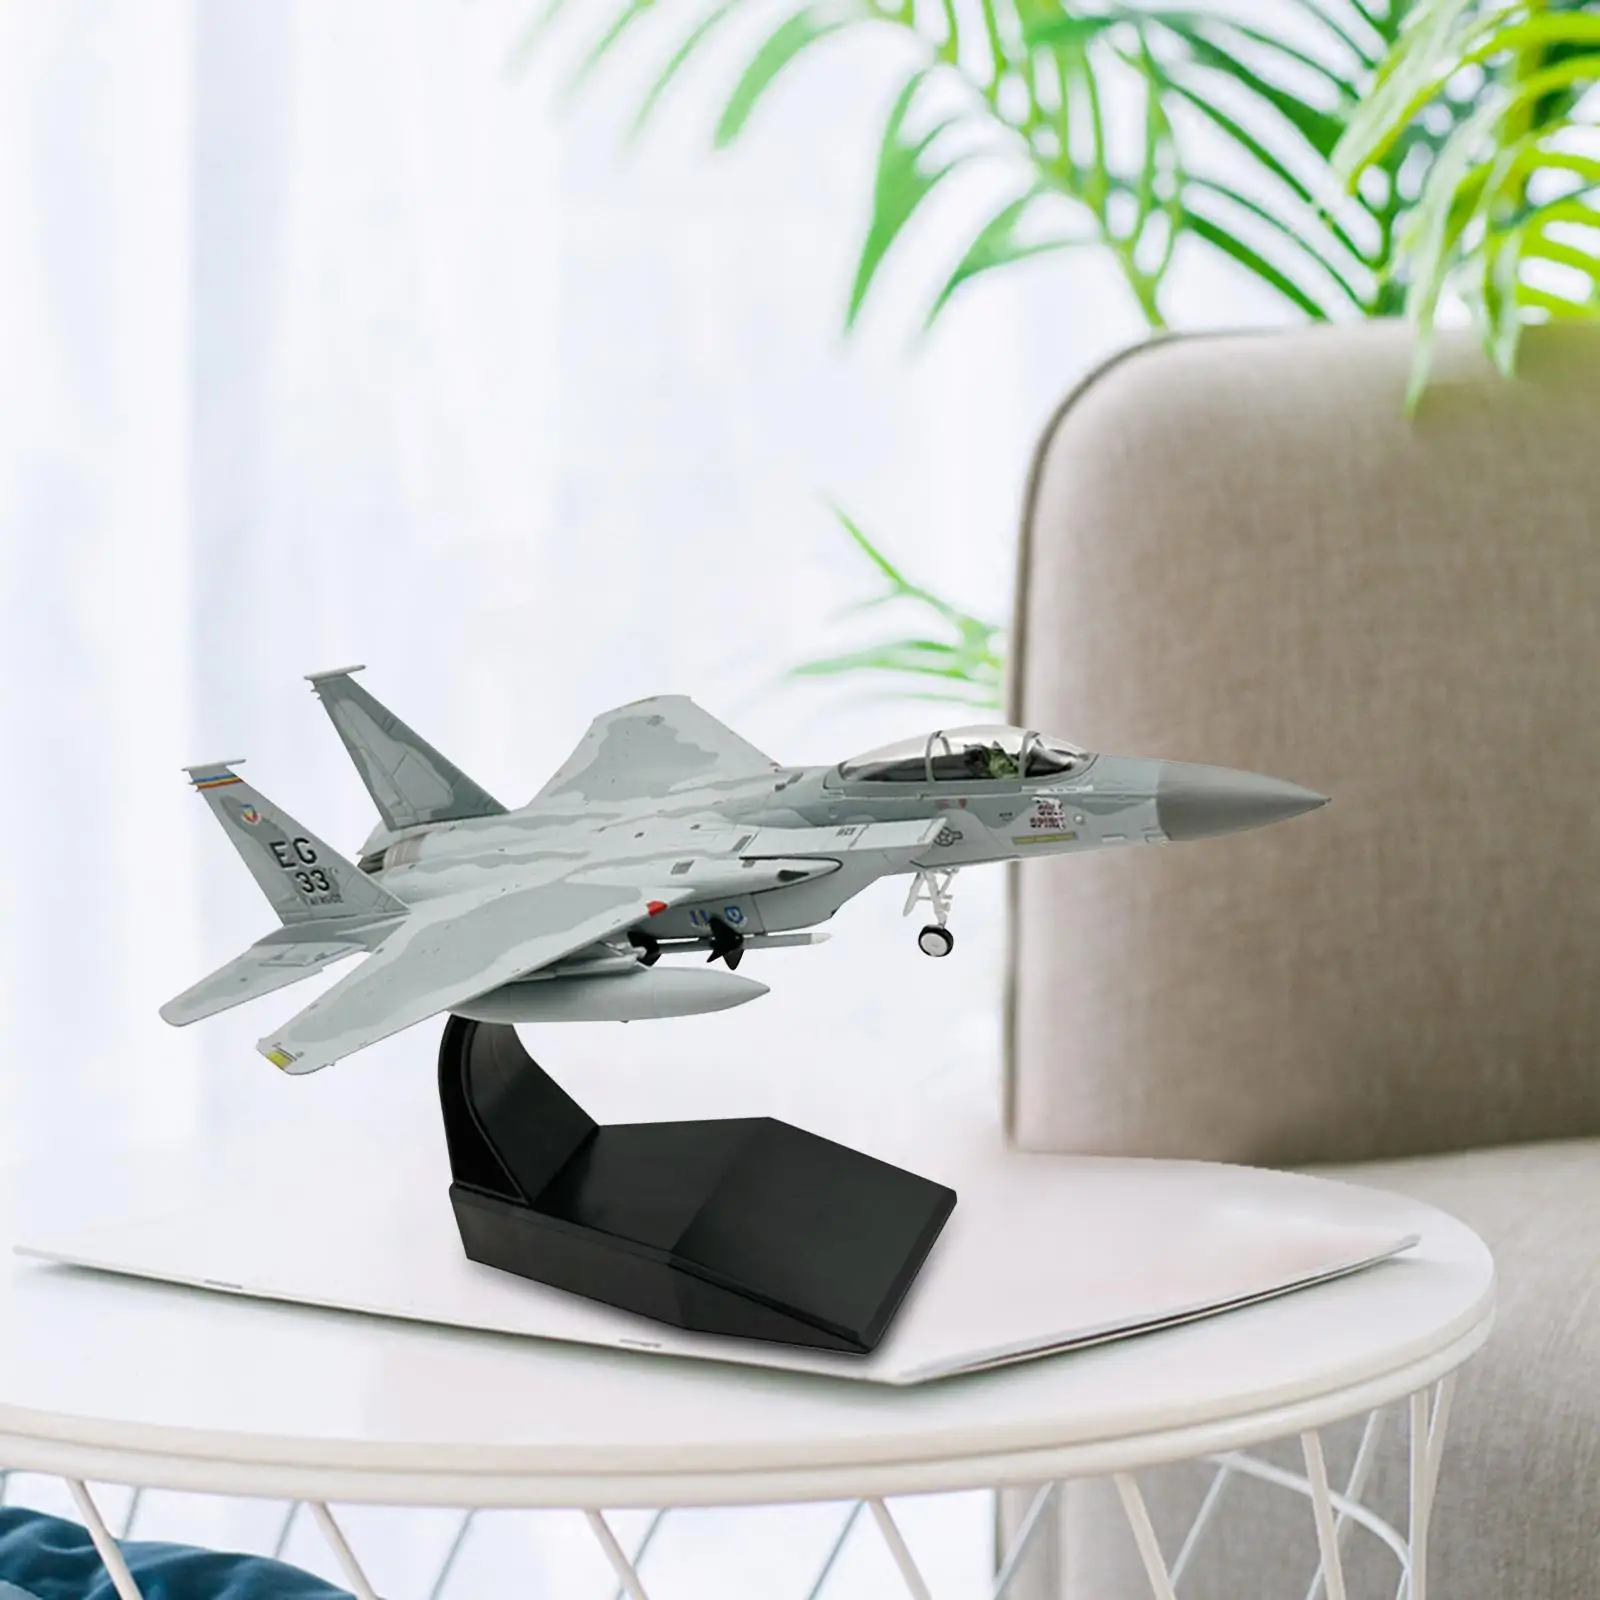 1/100 Scale F Fighter Collectibles Display for Home Decor Fighter Toy Ornament Home Decoration Collectables